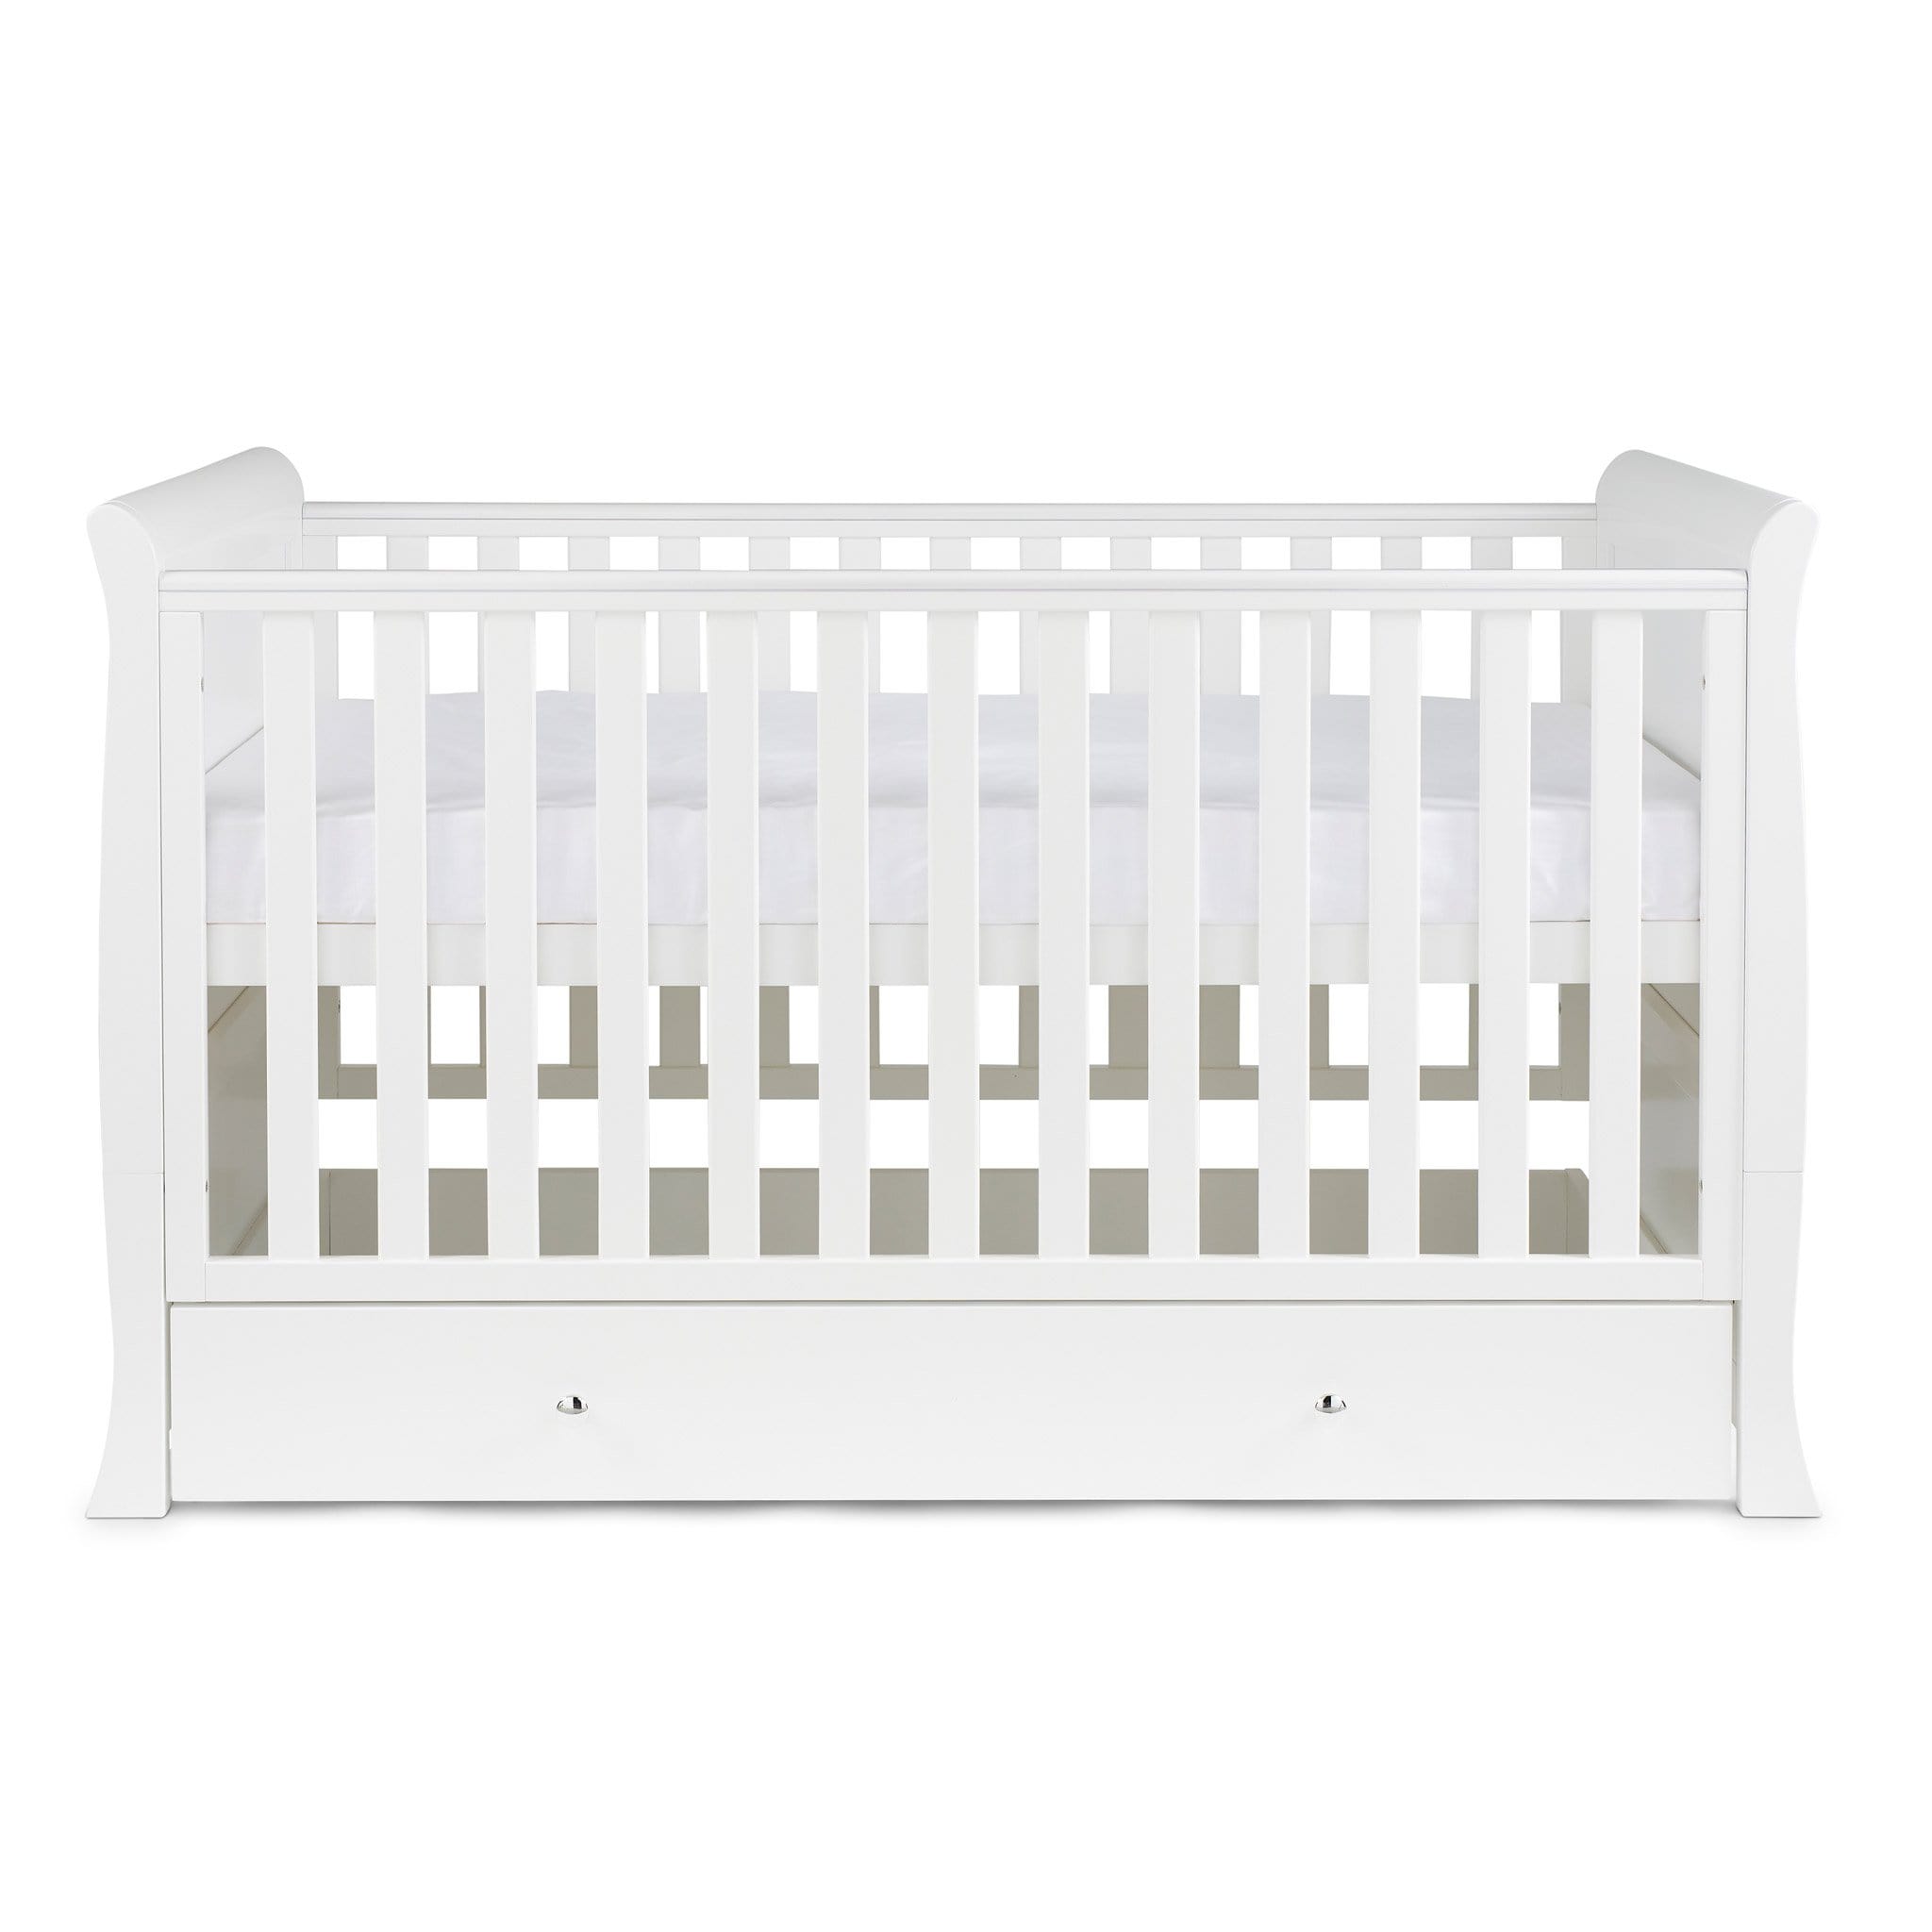 Ickle Bubba Nursery Room Sets Ickle Bubba Snowdon Classic 3 Piece Furniture Set - White